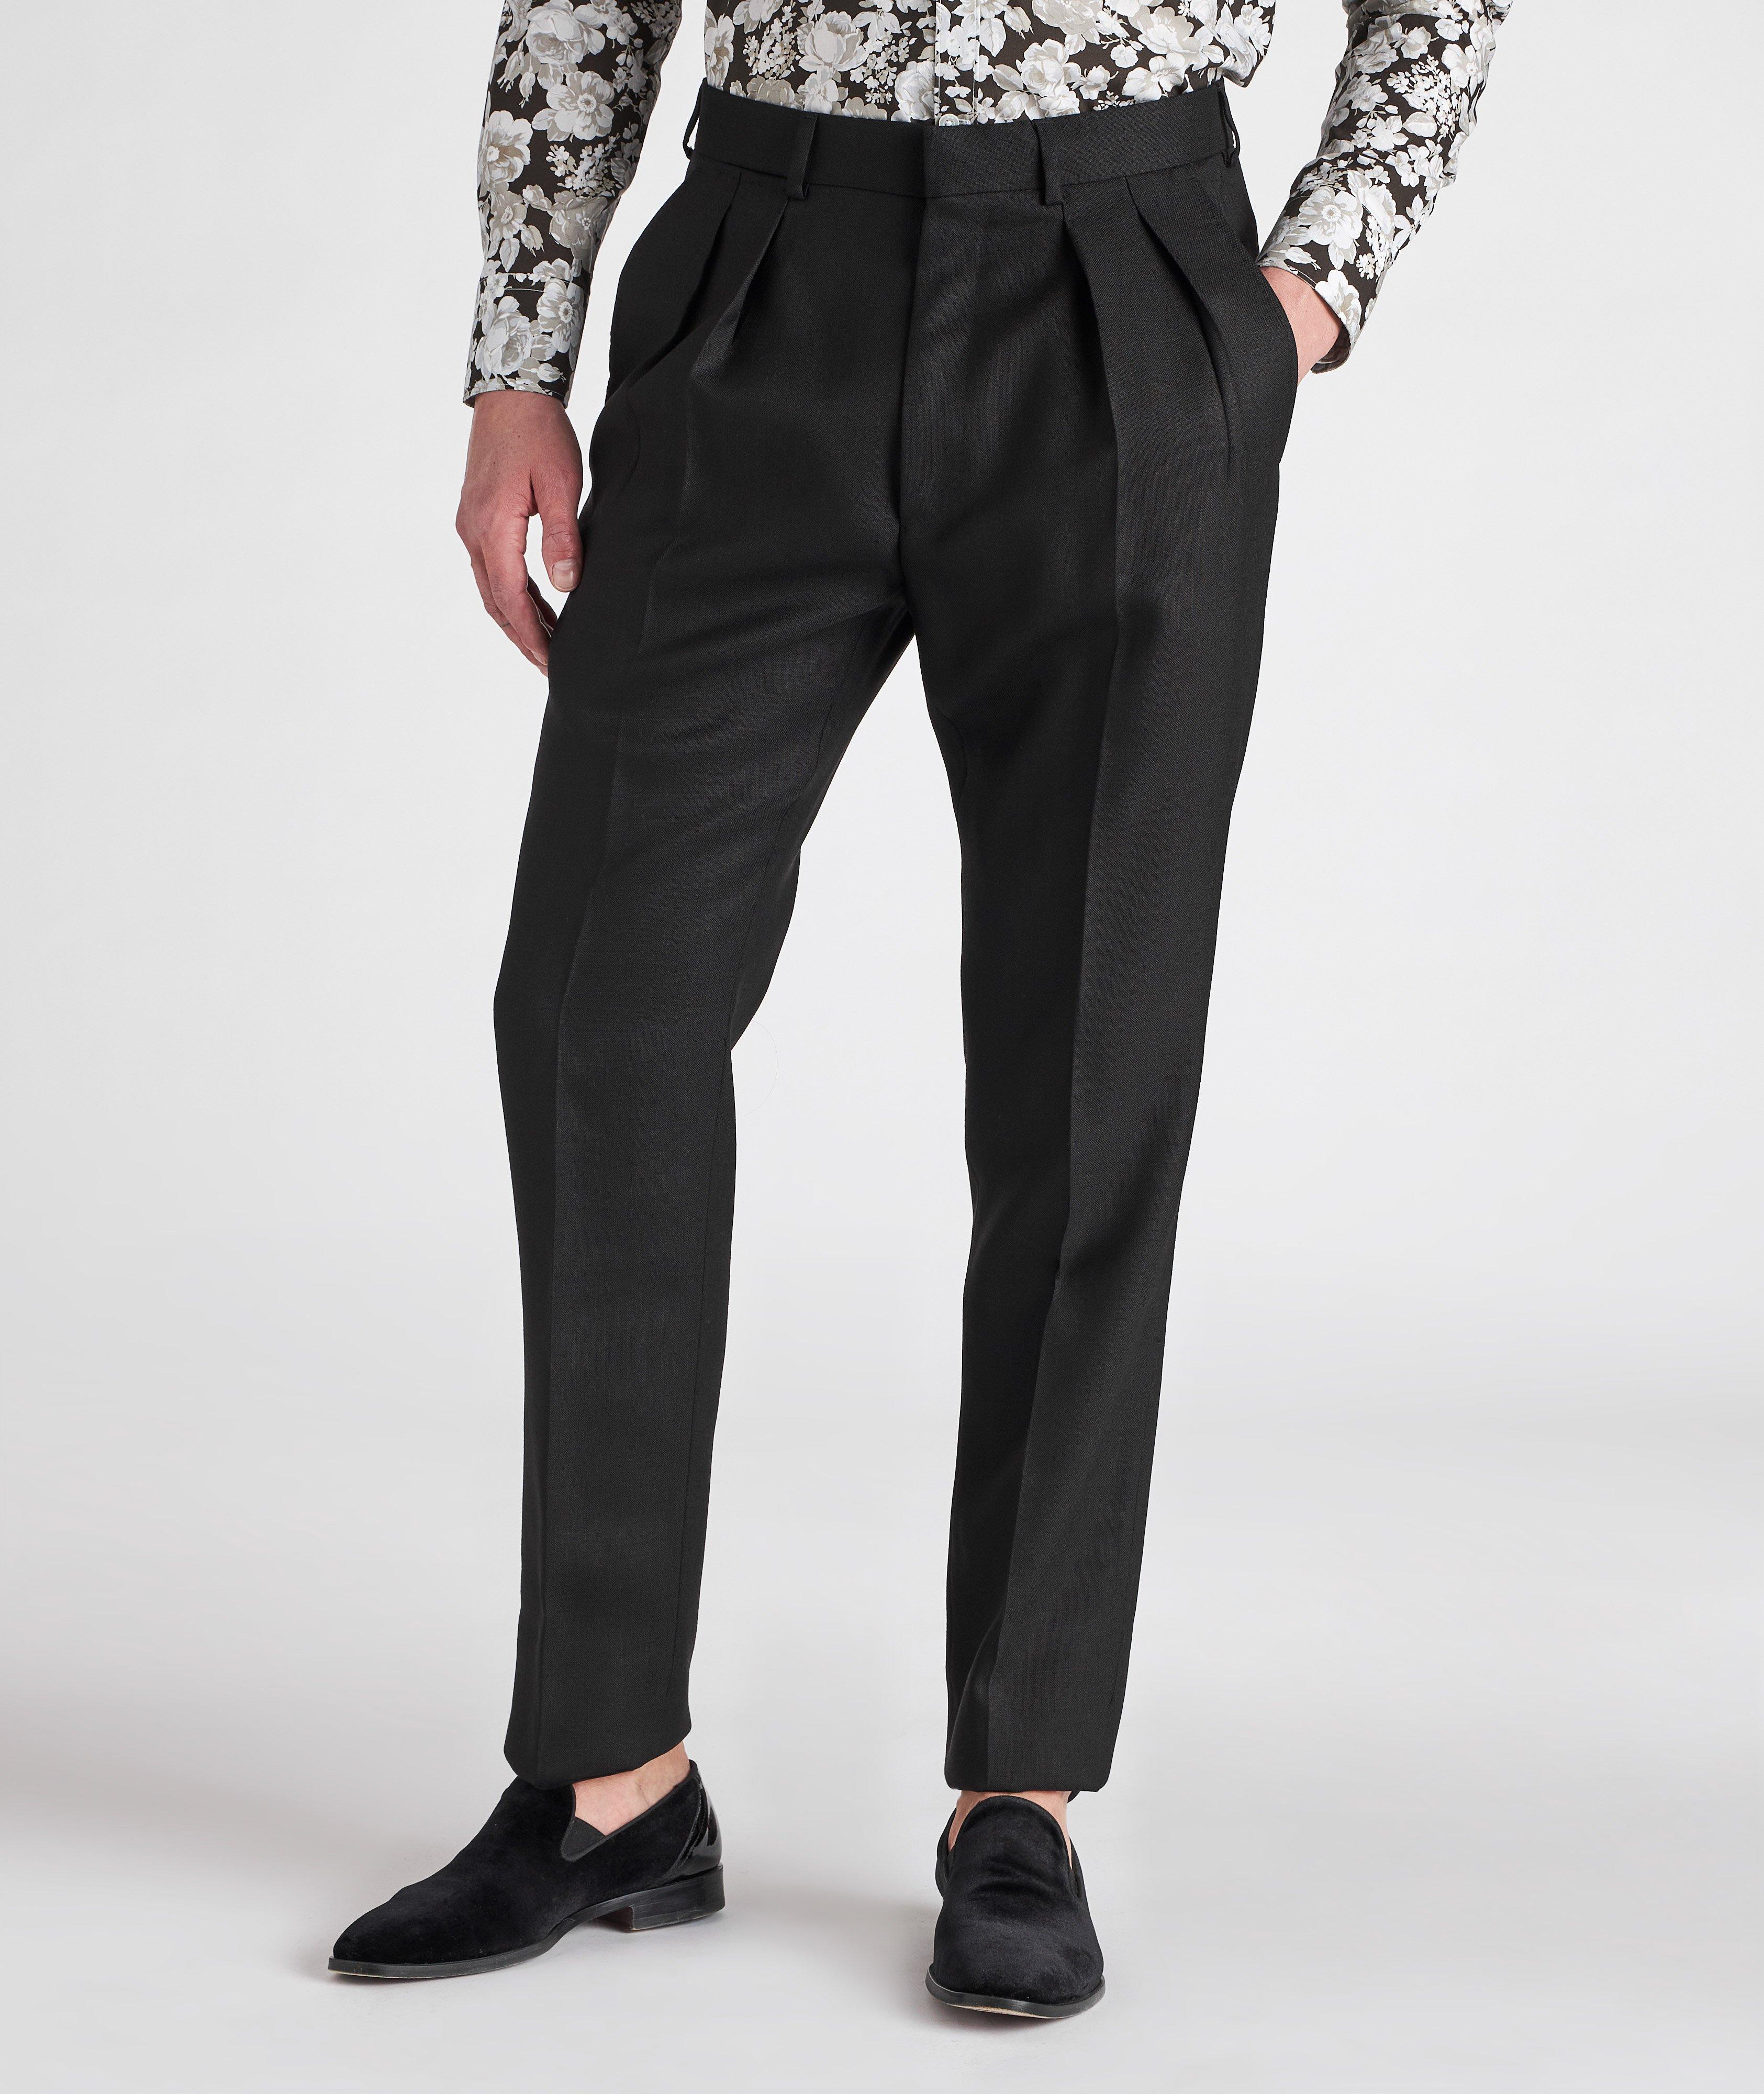 Slim-Fit Mohair And Viscose Dress Pants image 1